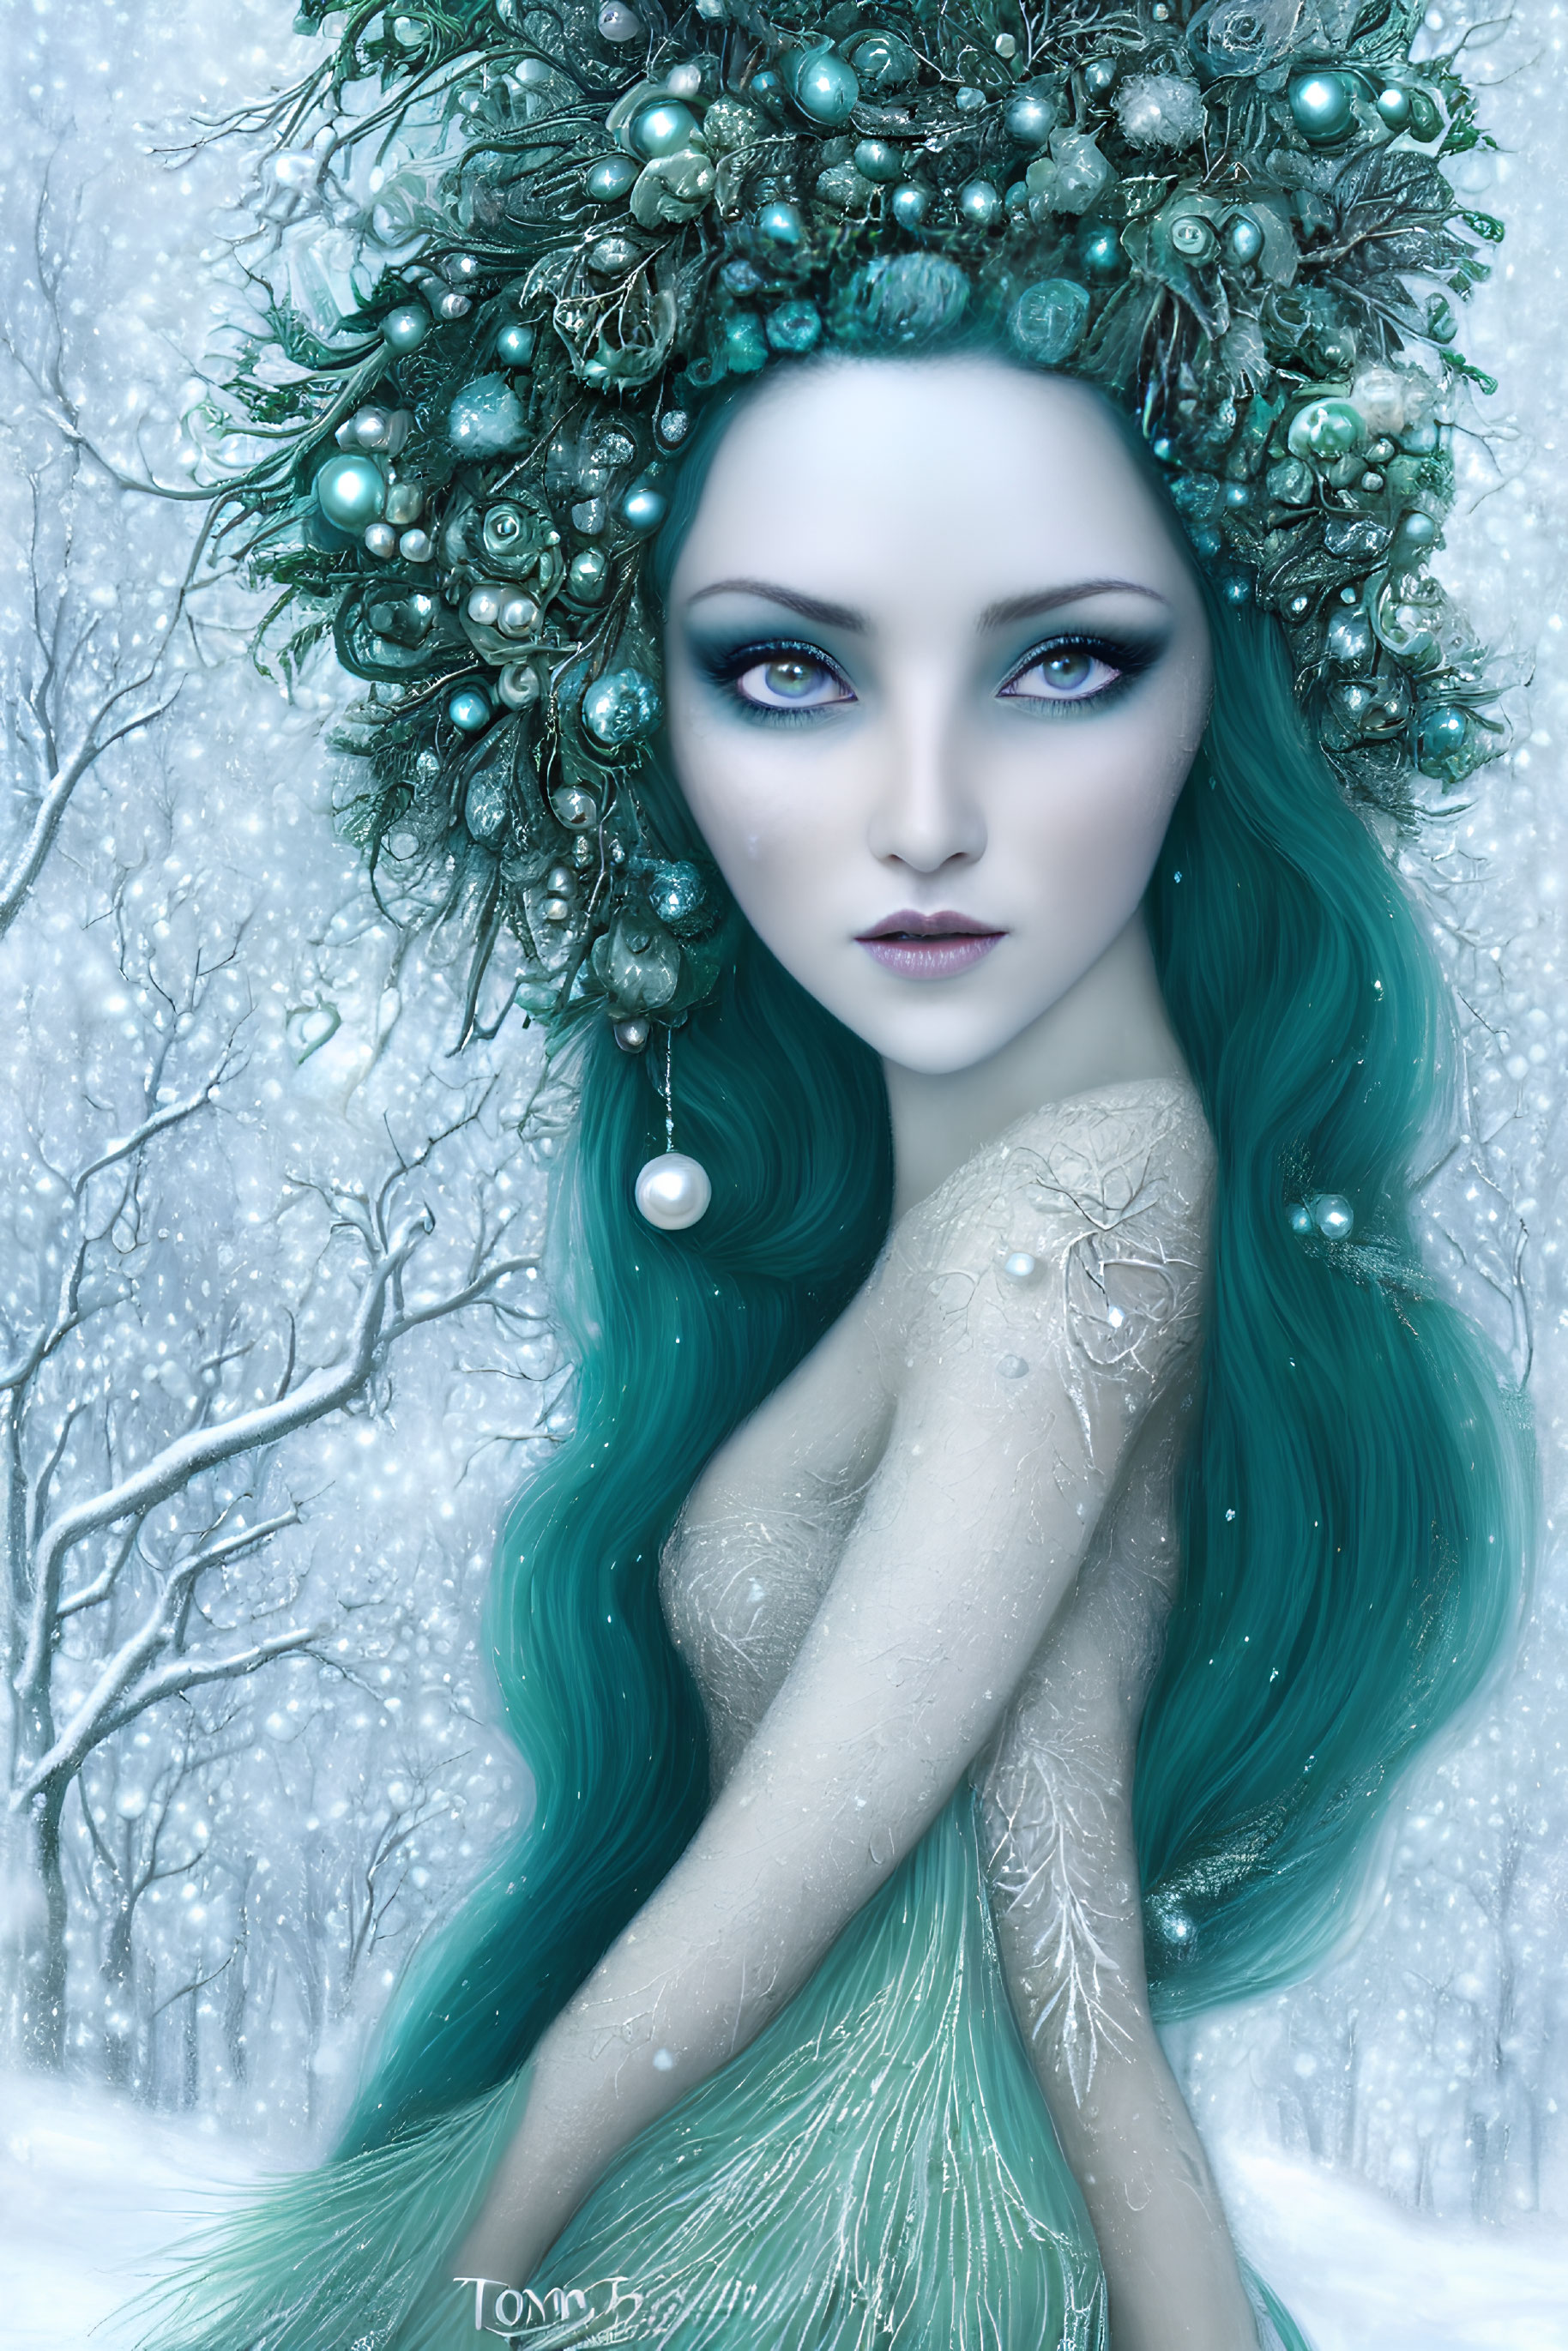 Woman with Blue-Green Hair and Crown in Snowy Forest